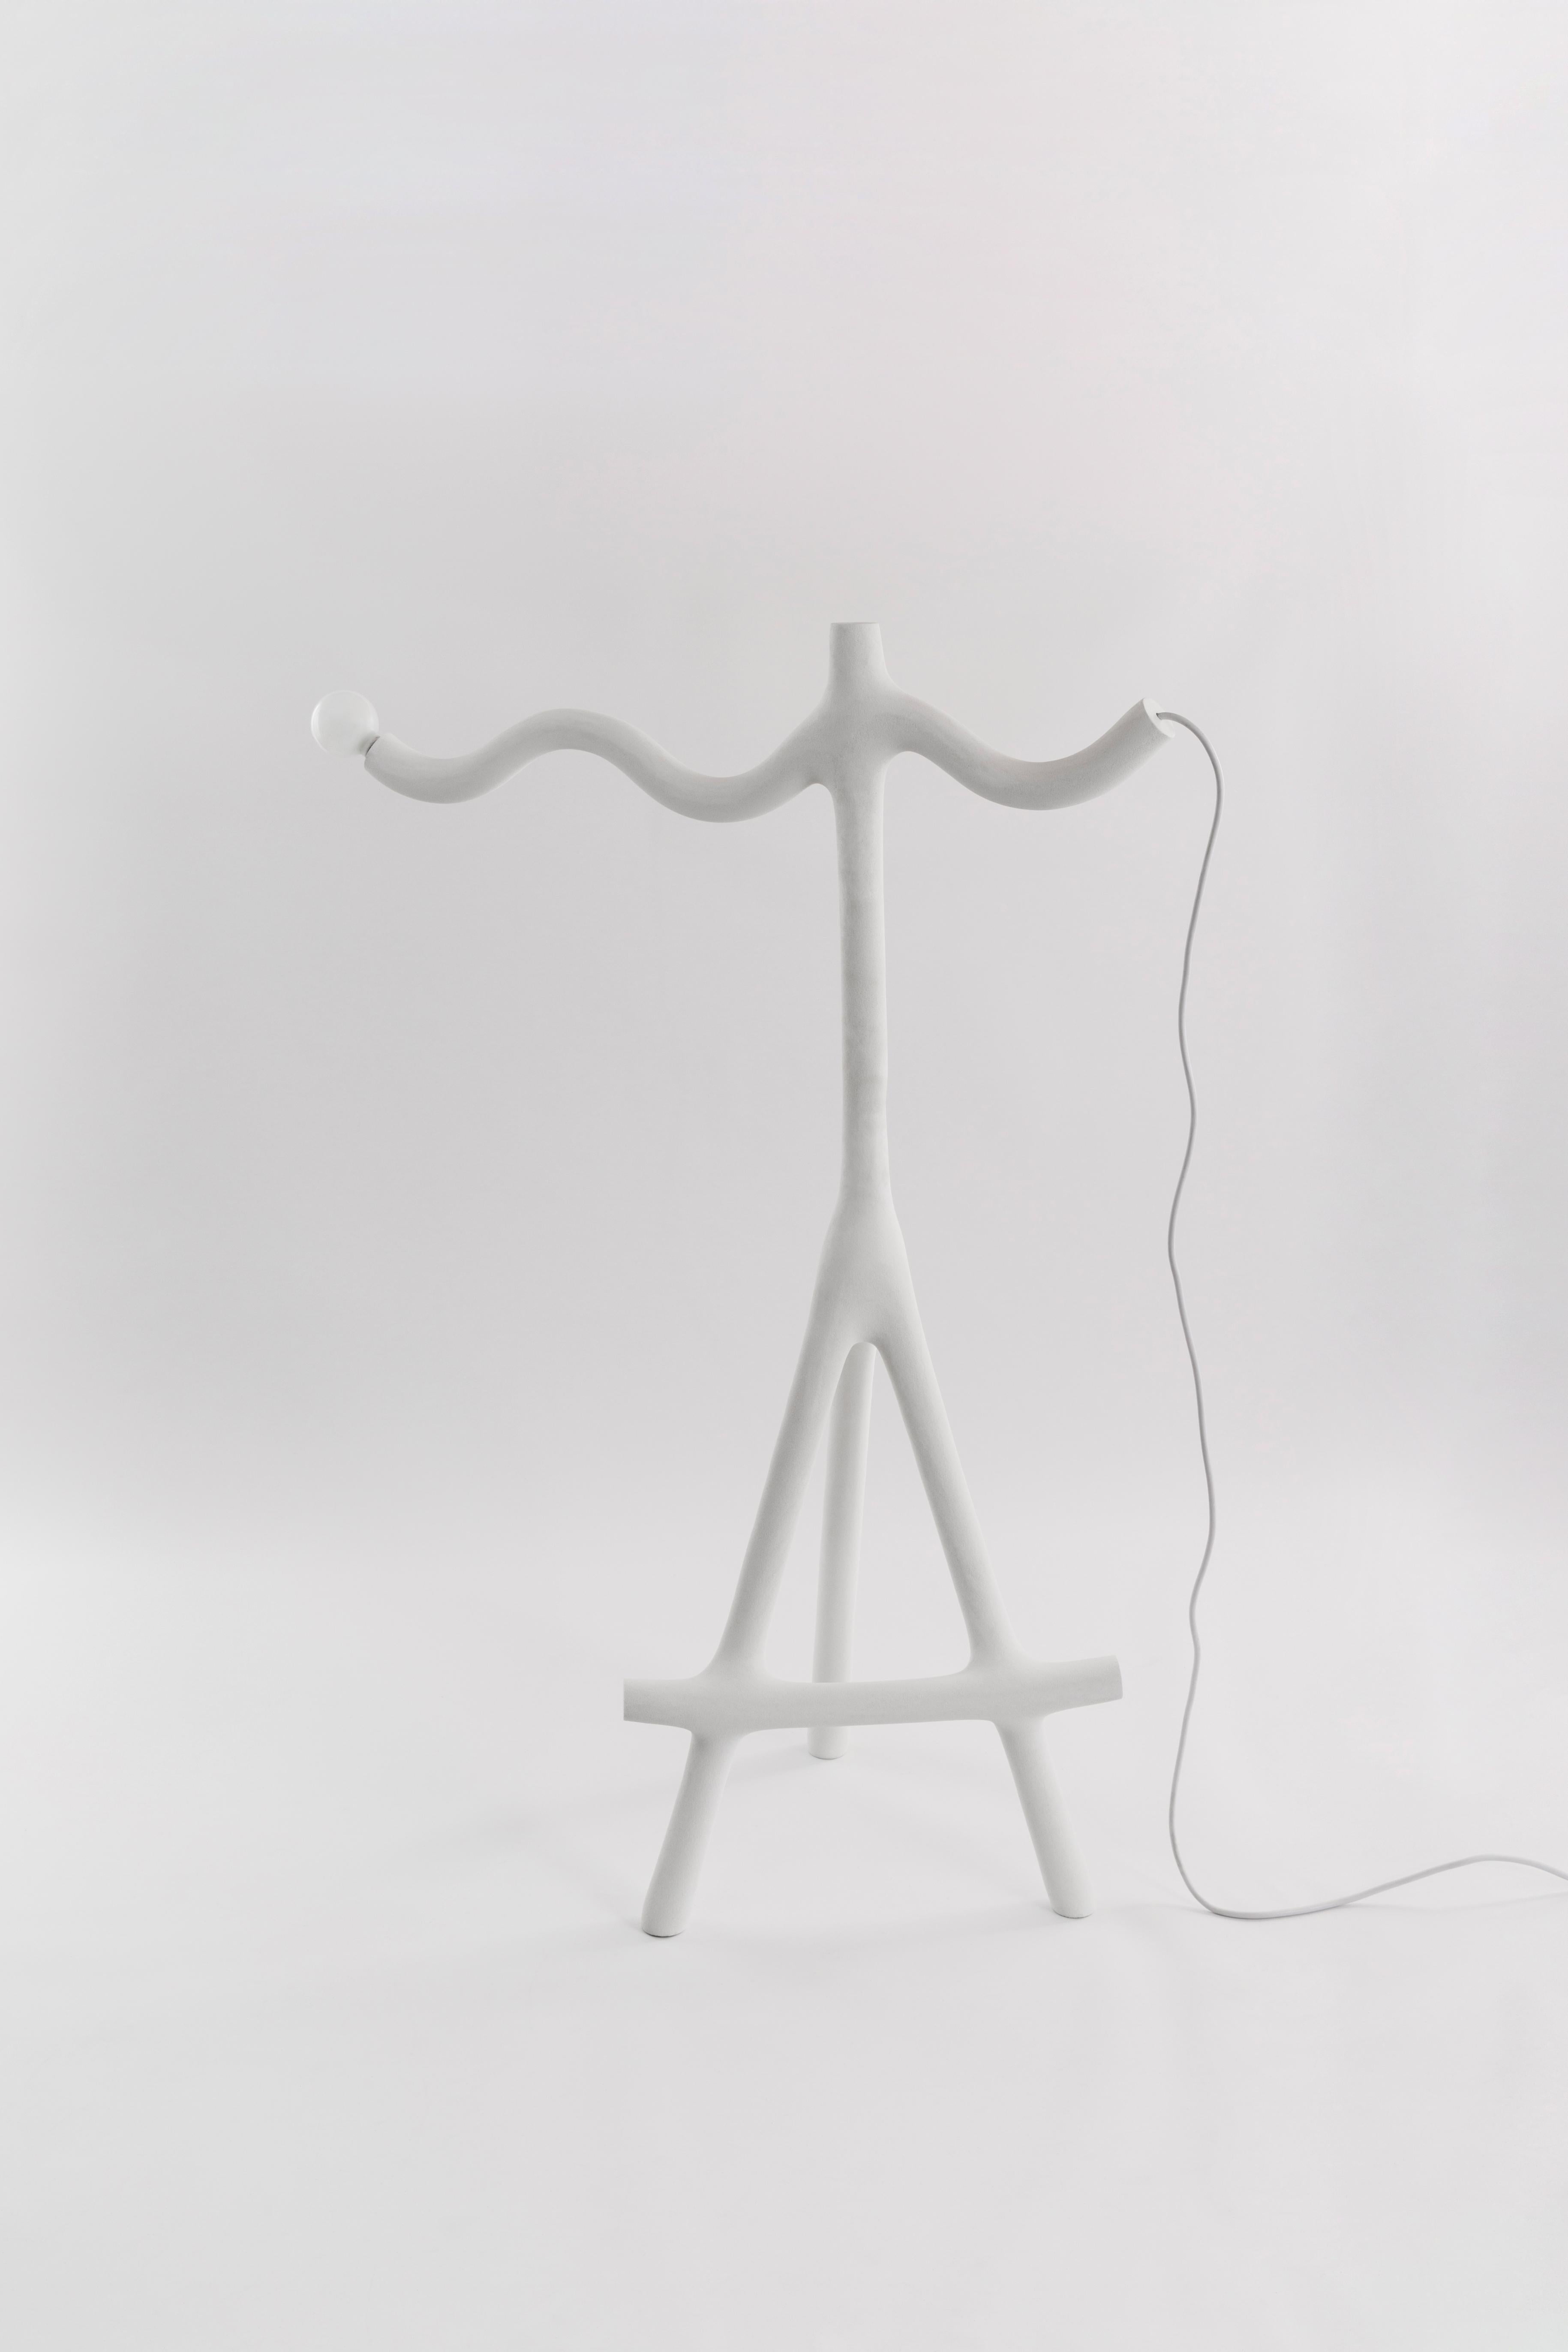 Wave and sticks lamp by Hot Wire Extensions
Limited edition
Materials: Waste SLS 3D nylon powder, Sand from sustainable sources
Dimensions: L 110 x W 53 x H 168 cm 
Colour: white

All our lamps can be wired according to each country. If sold to the